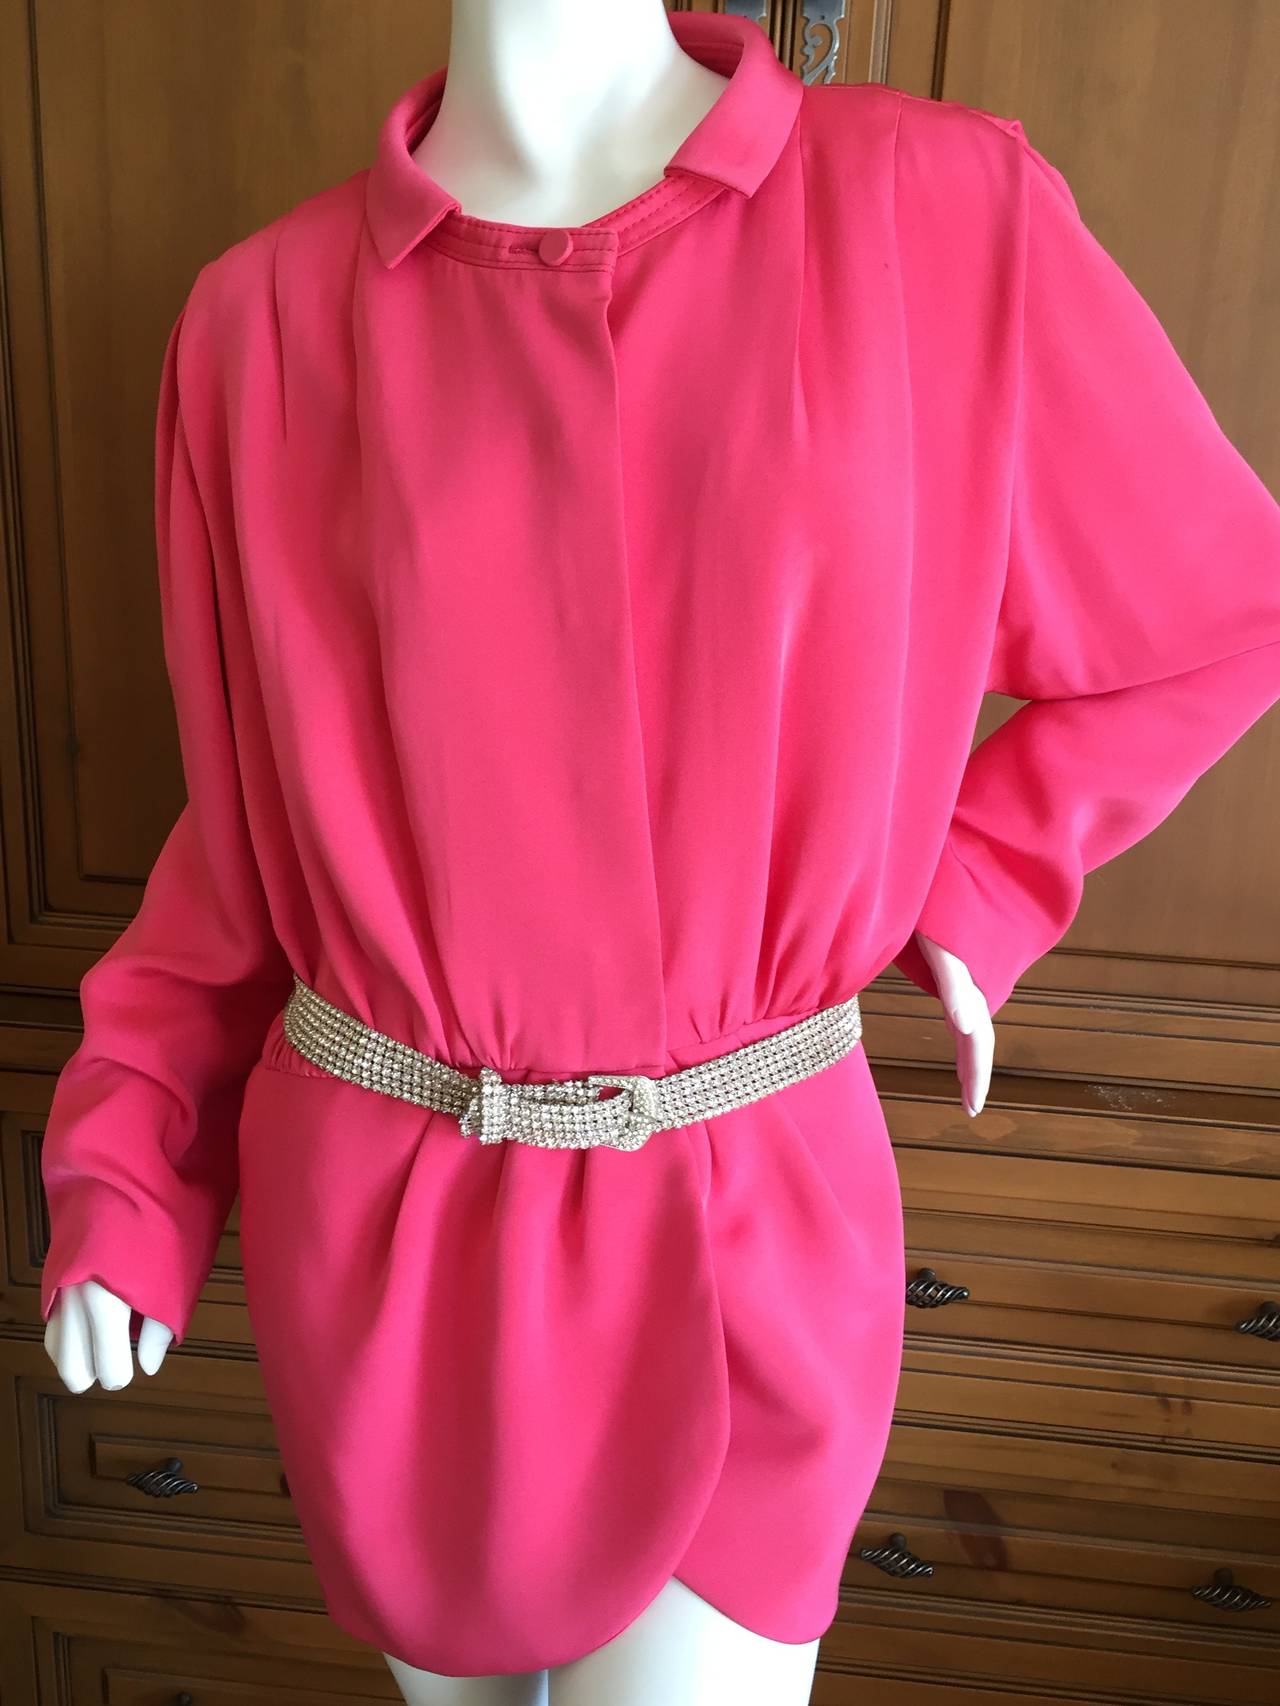 Shocking pink silk top/jacket from James Galanos for I Magnin.
I'm not certain if this is a jacket or a blouse. 
Gathered at the waist, with hidden buttons.
I believe there were shoulder pads originally , which must have been removed to modernize